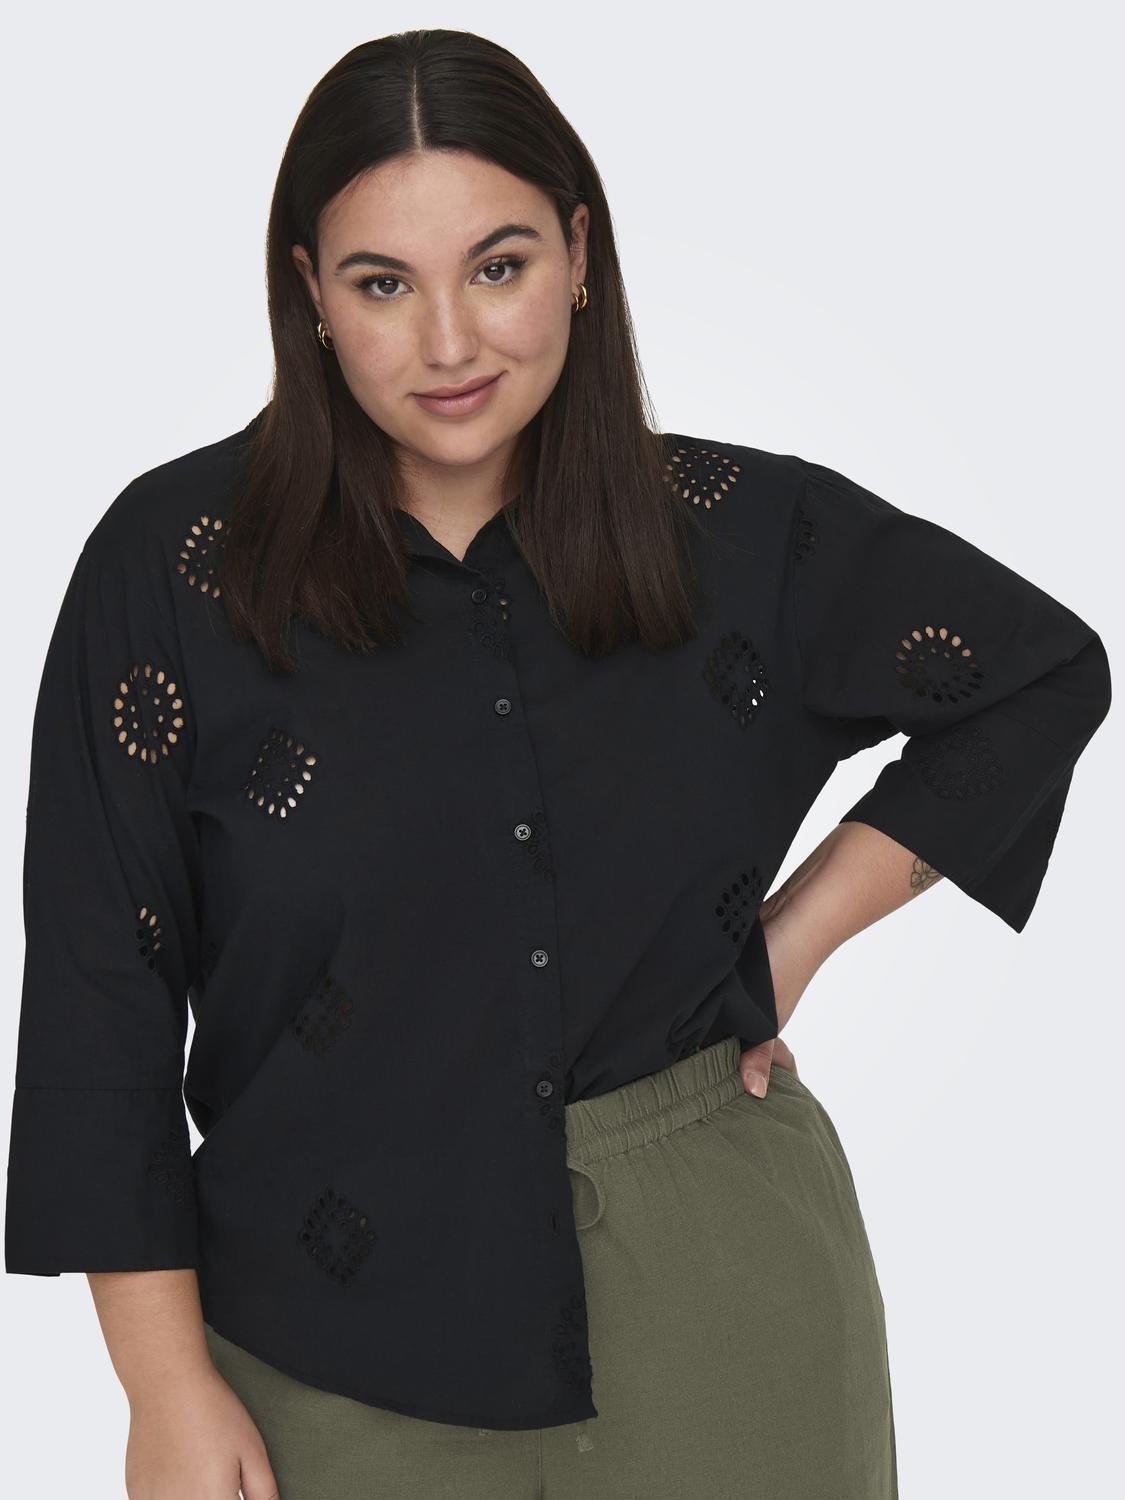 ONLY Curvy detailed cotton short -Black - 15306949